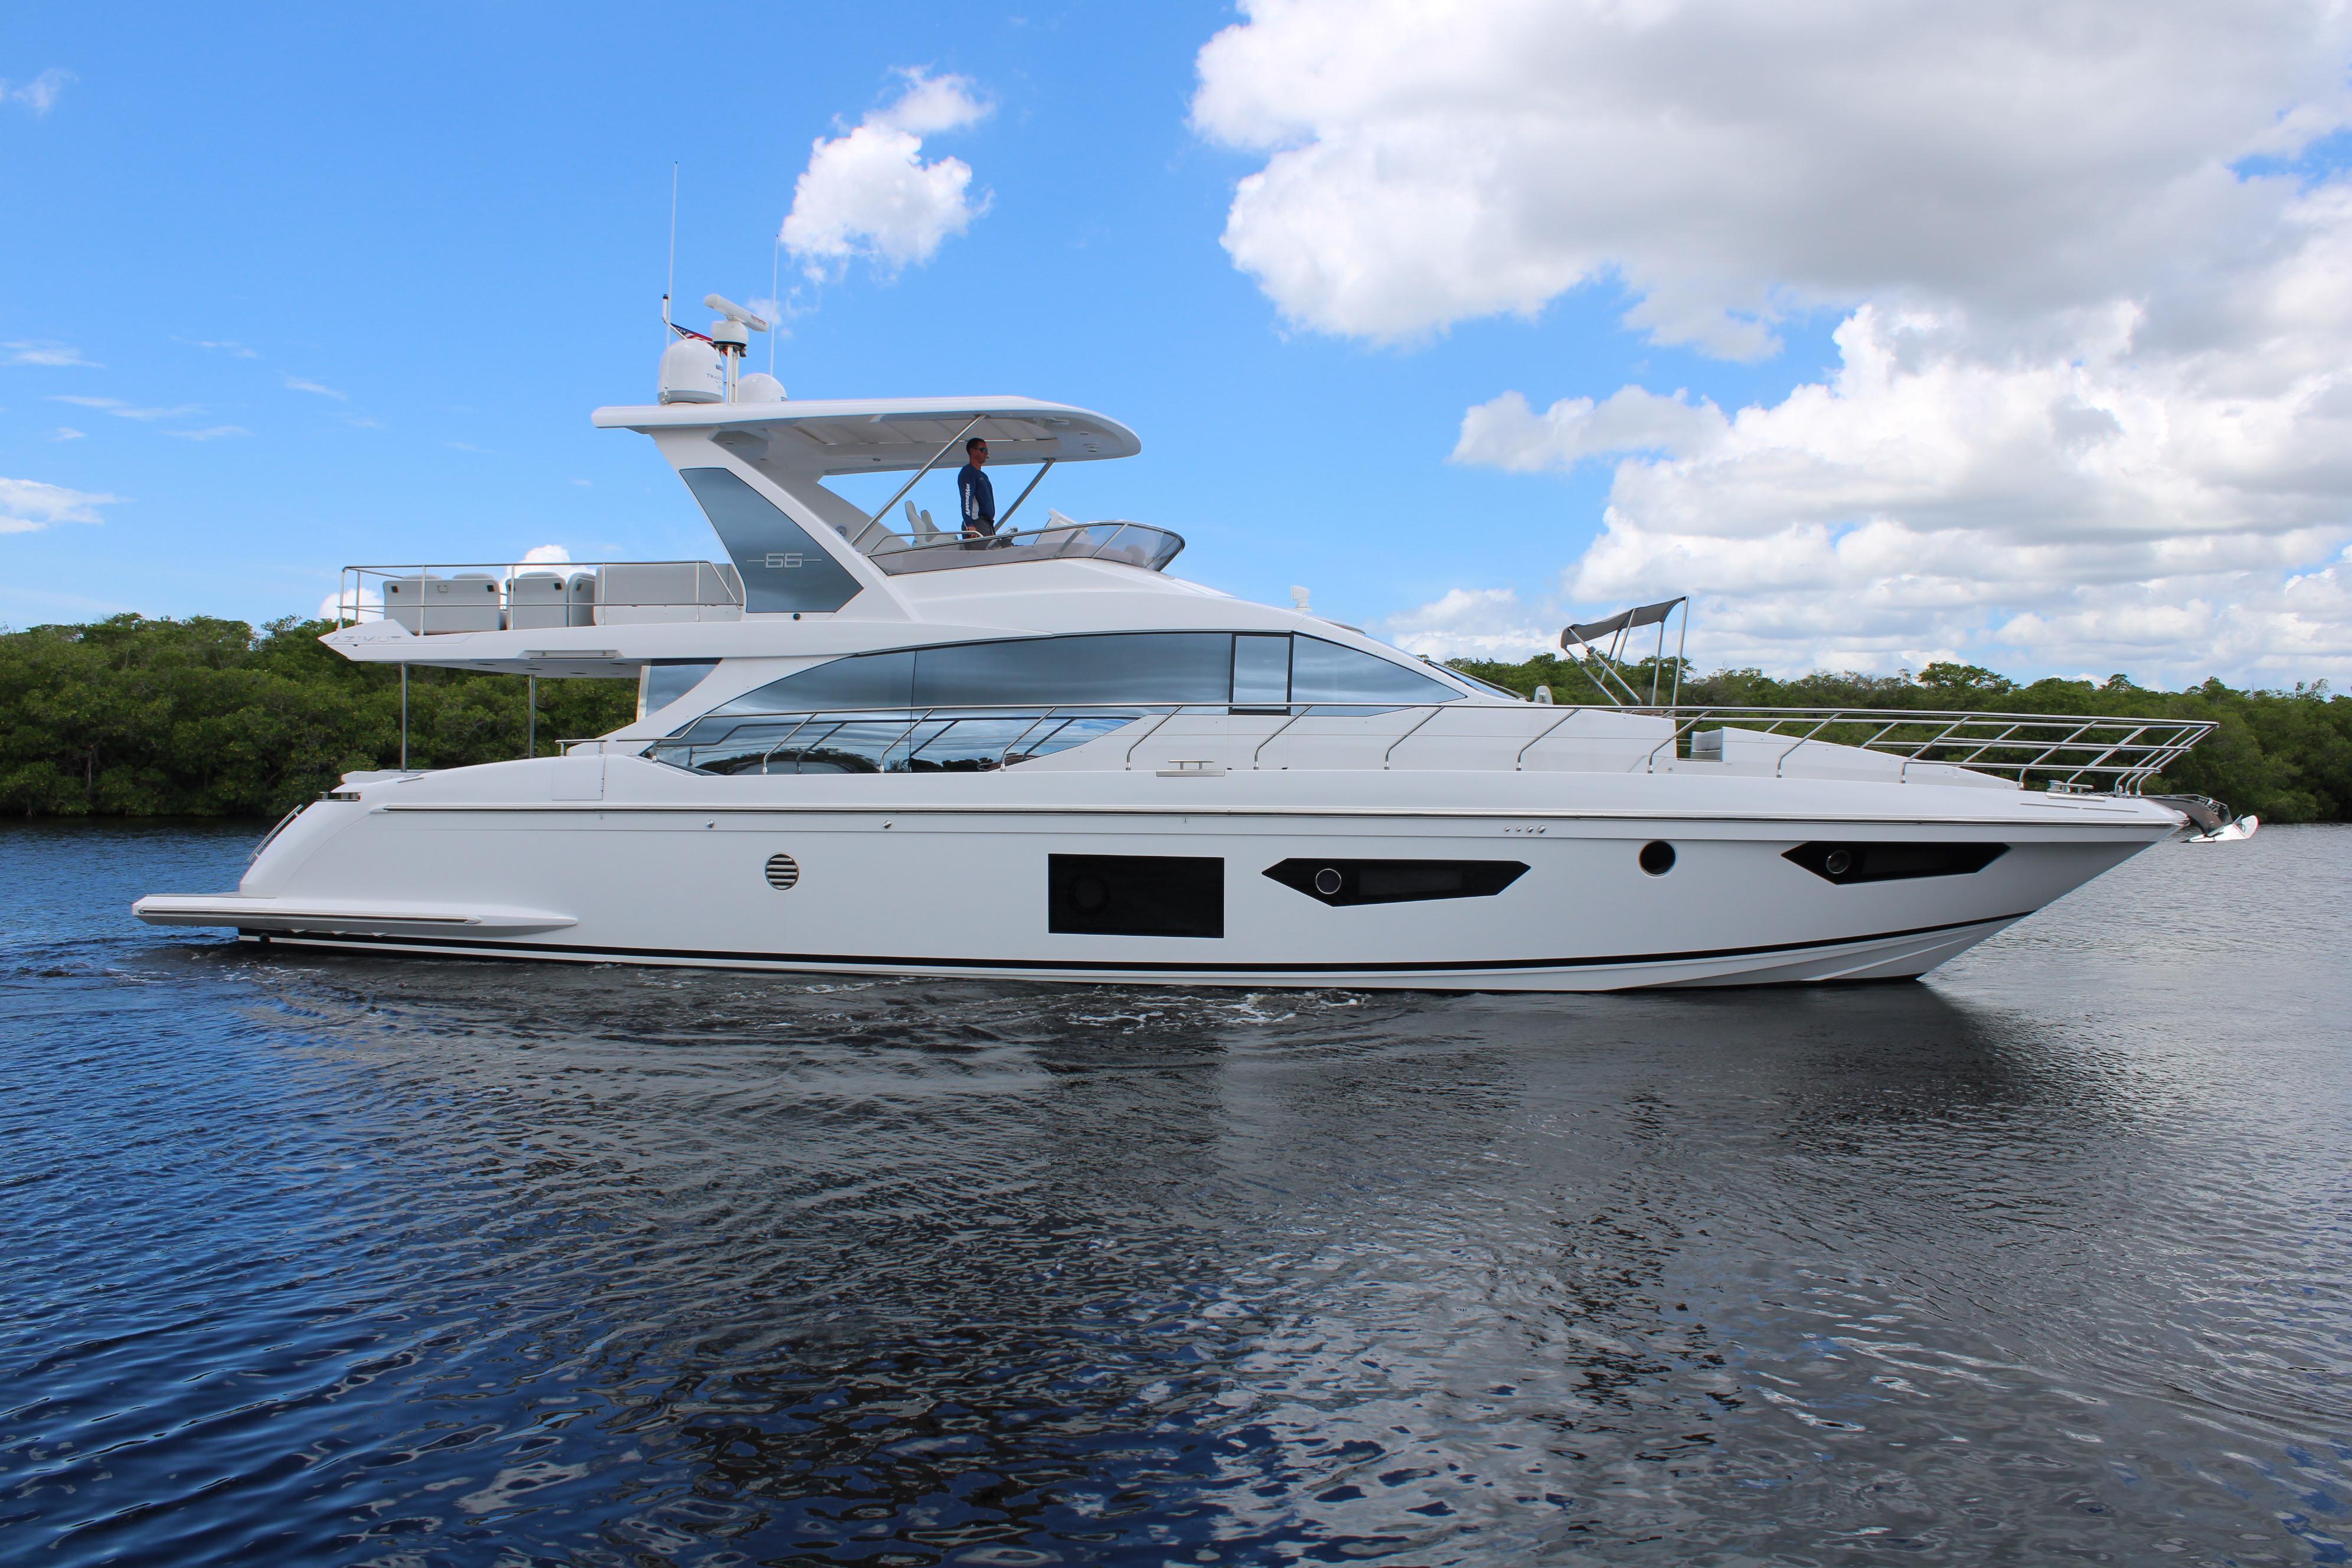 65 ft motor yacht for sale